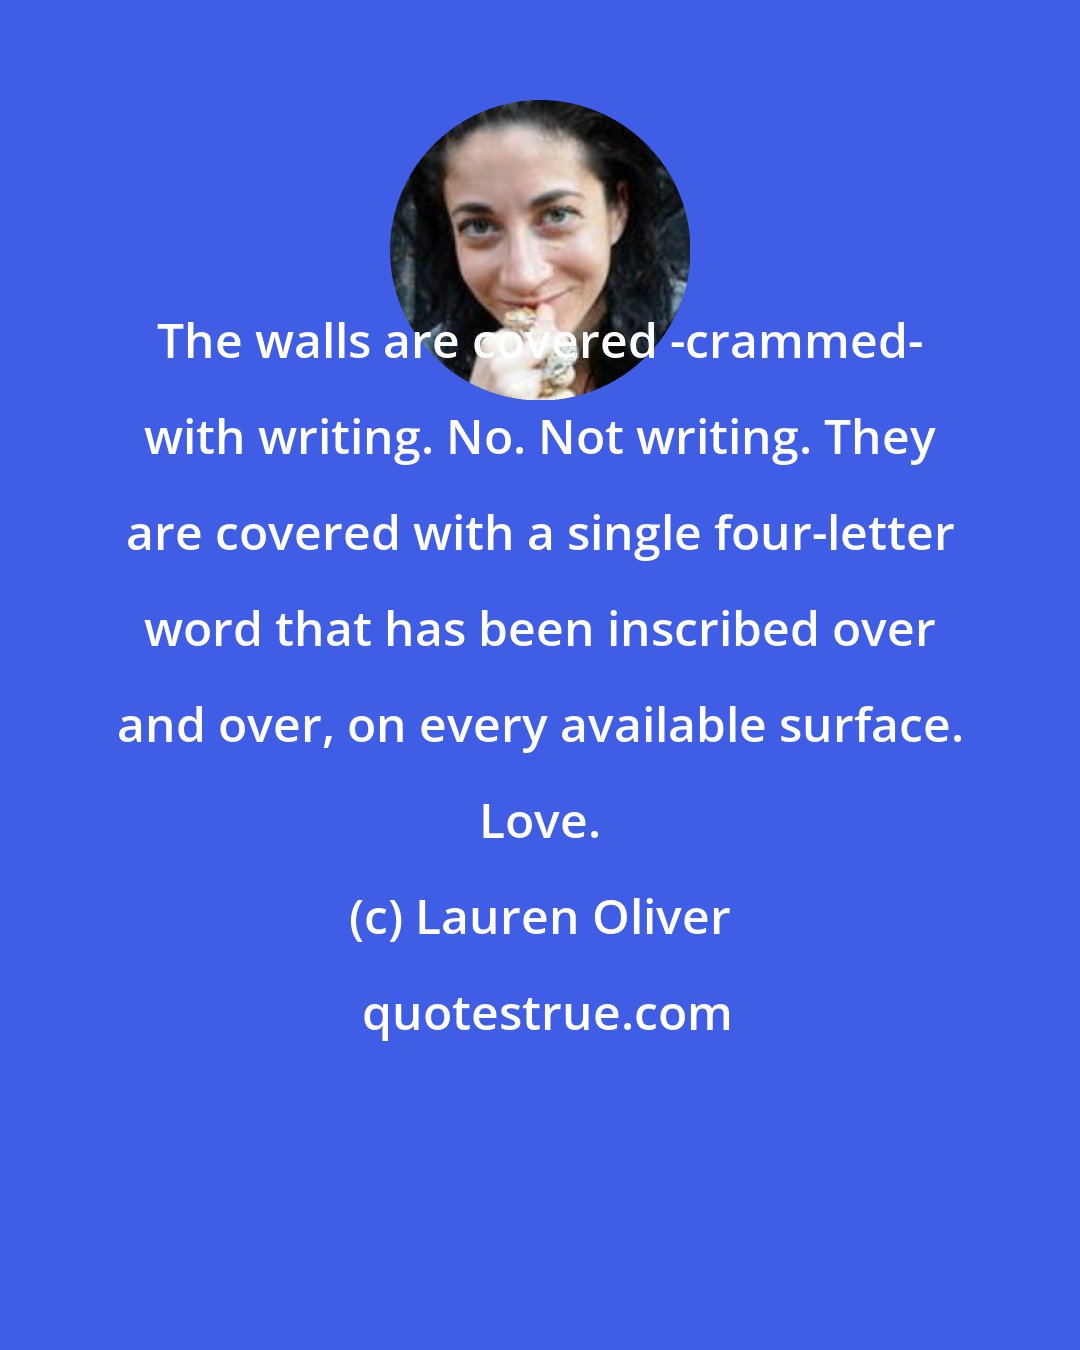 Lauren Oliver: The walls are covered -crammed- with writing. No. Not writing. They are covered with a single four-letter word that has been inscribed over and over, on every available surface. Love.